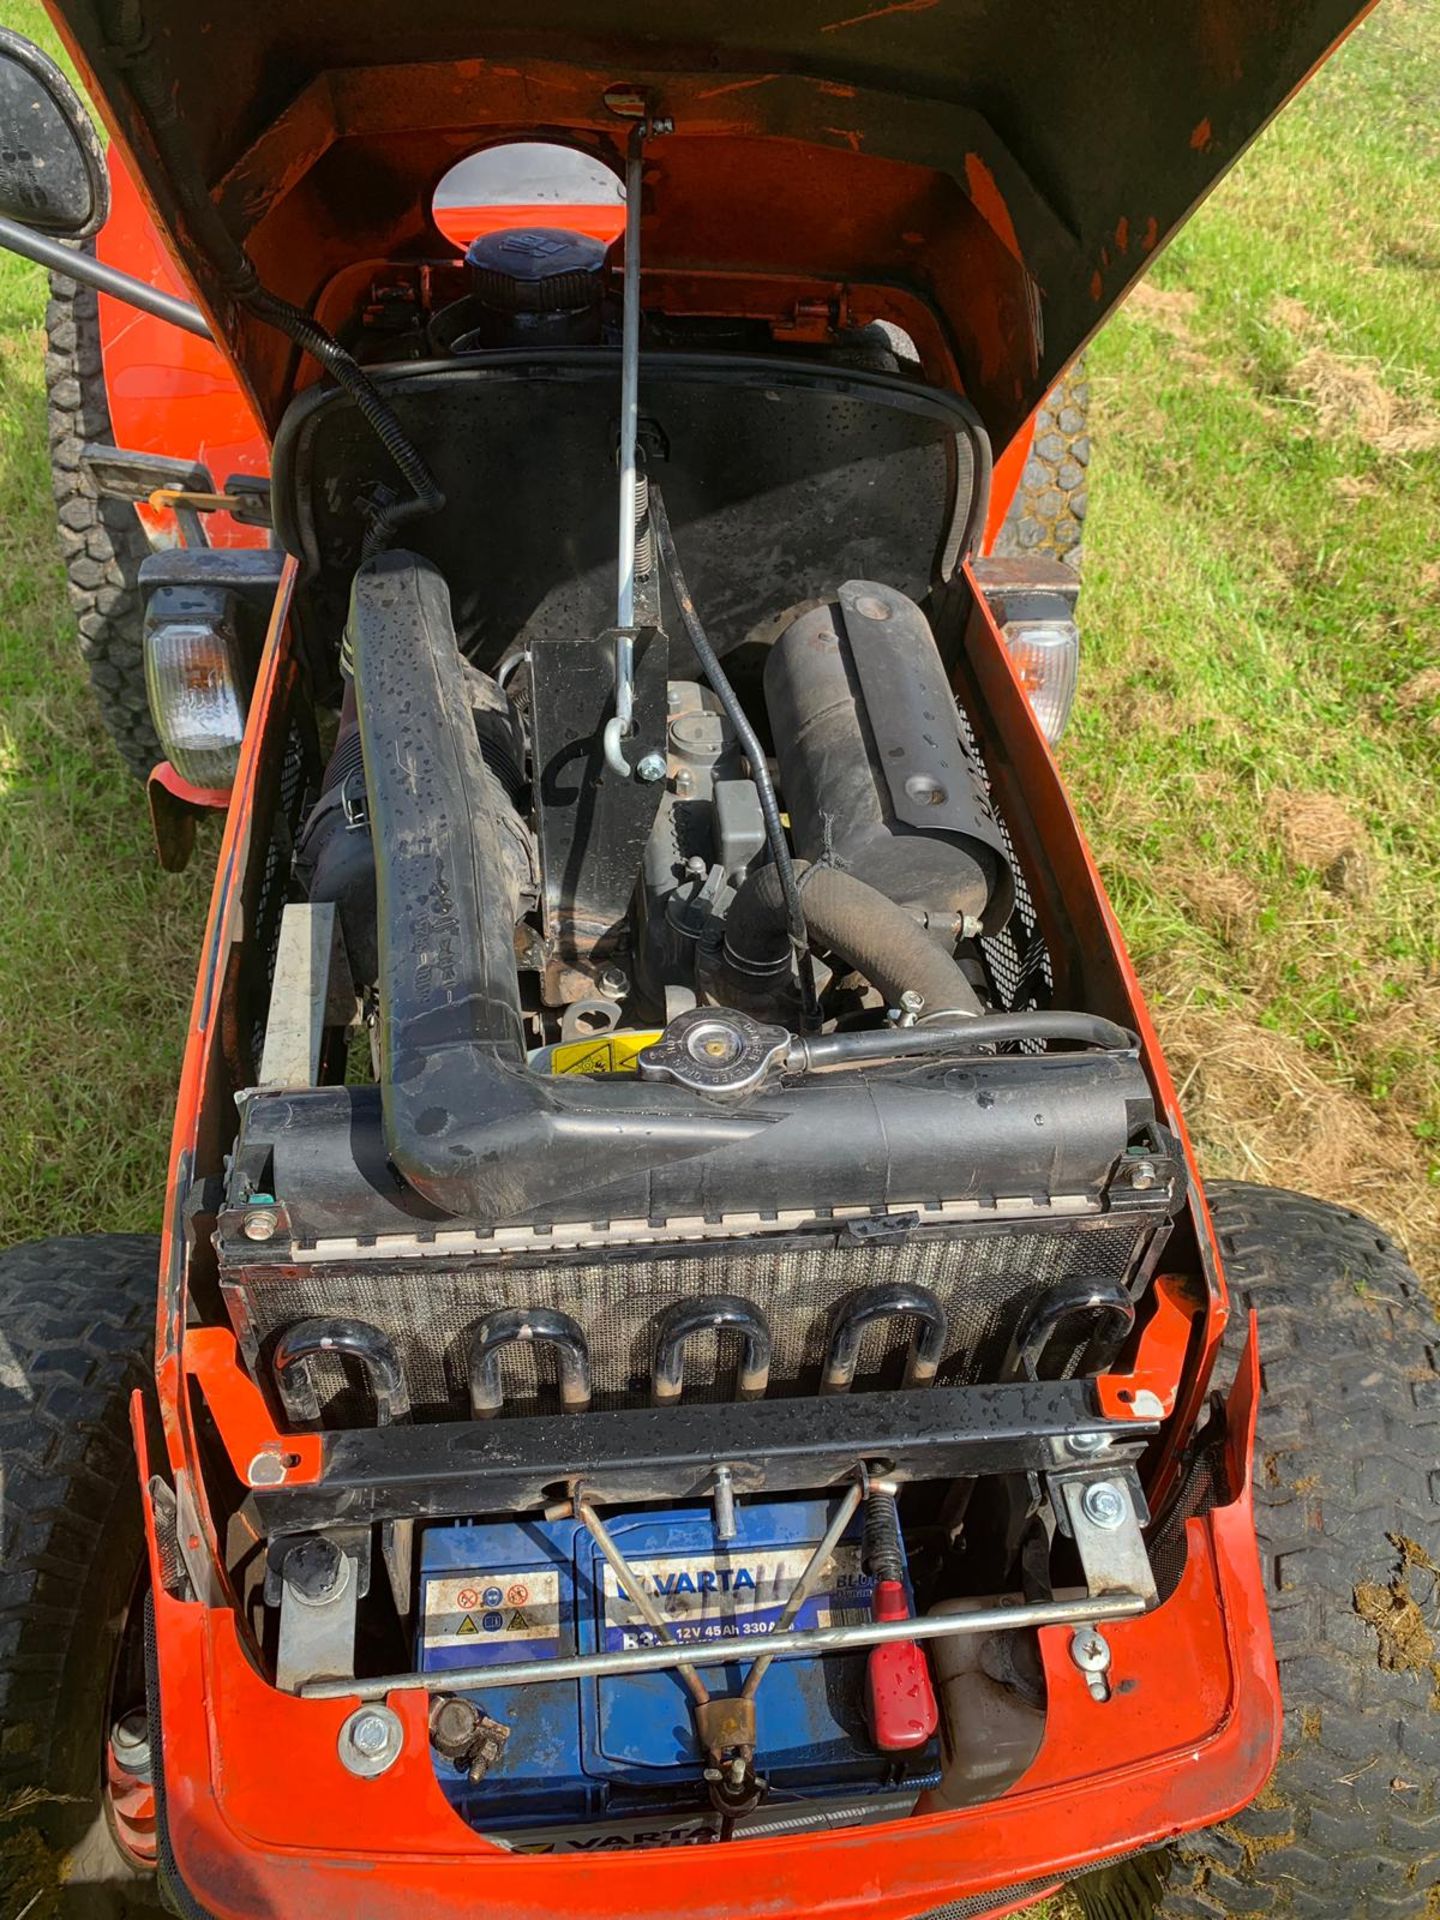 2017/17 REG KUBOTA B2530 COMPACT TRACTOR, RUNS AND WORKS, SHOWING 1989 HOURS *PLUS VAT* - Image 12 of 13